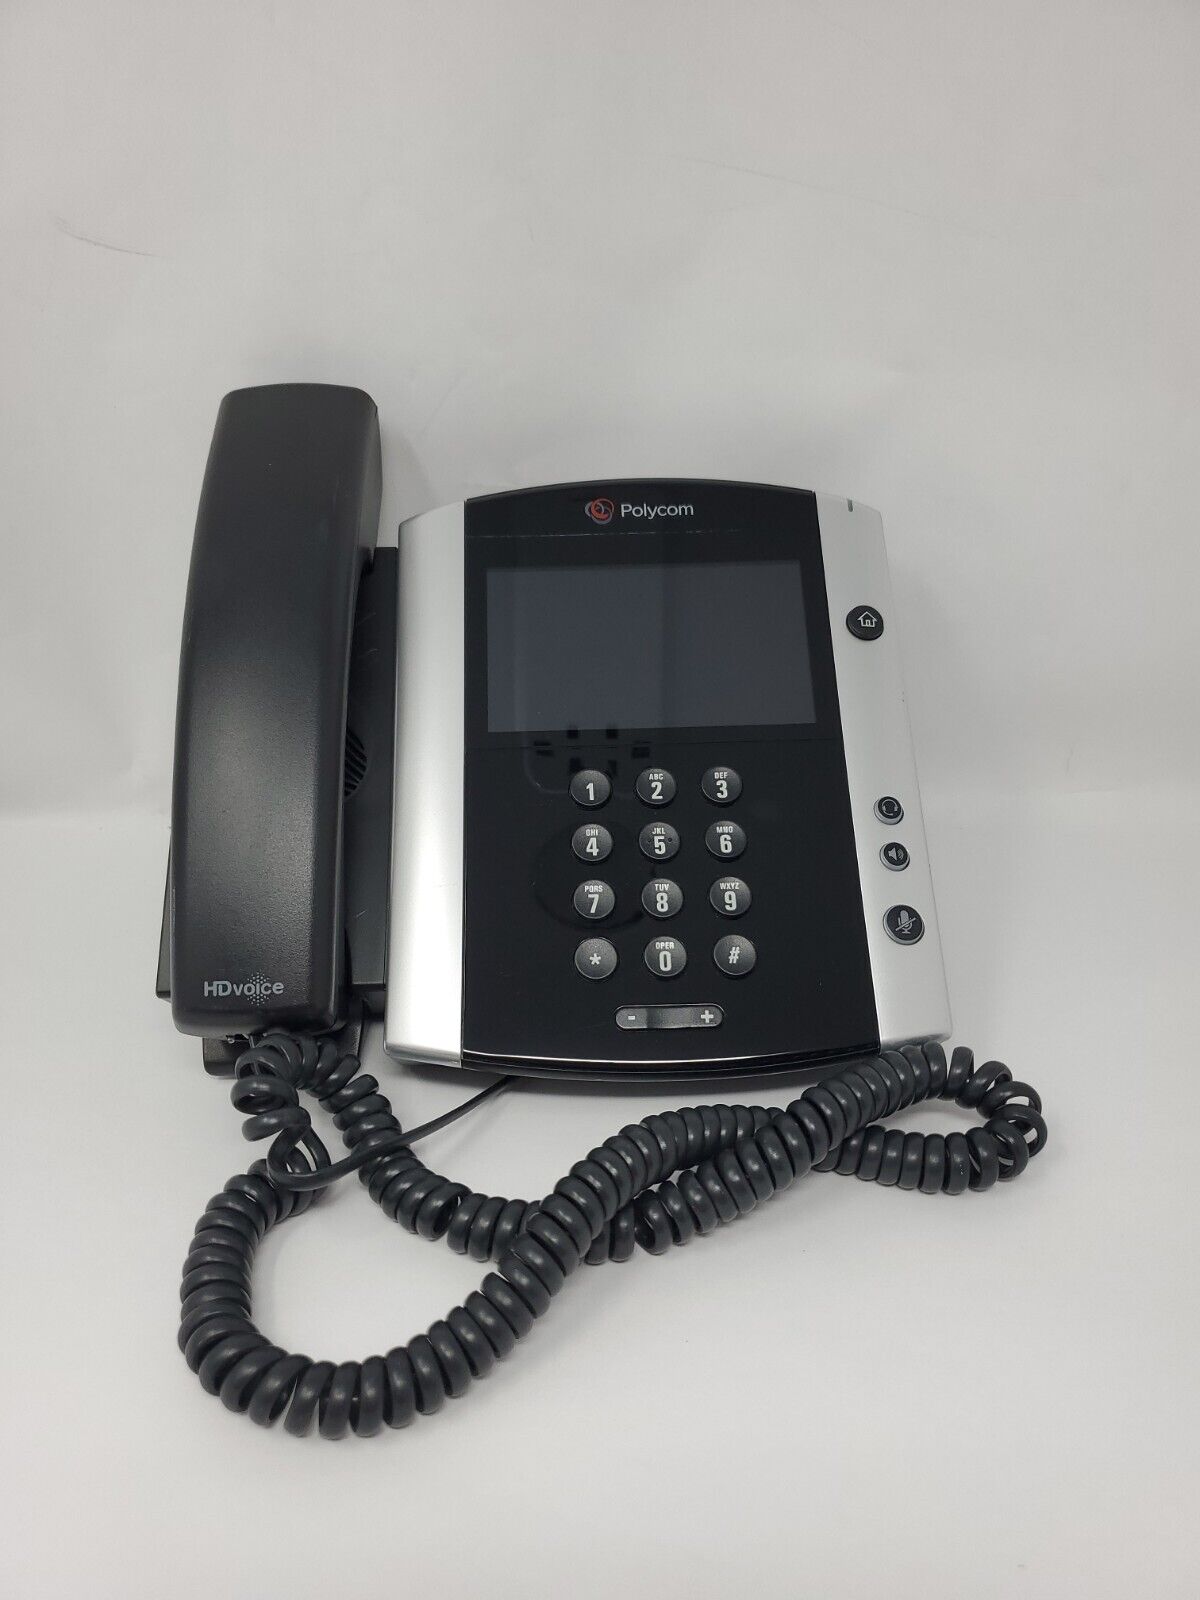 Polycom VVX 600 VoIP POE Corded Business Phone 2201-44600-001 Multiple Available